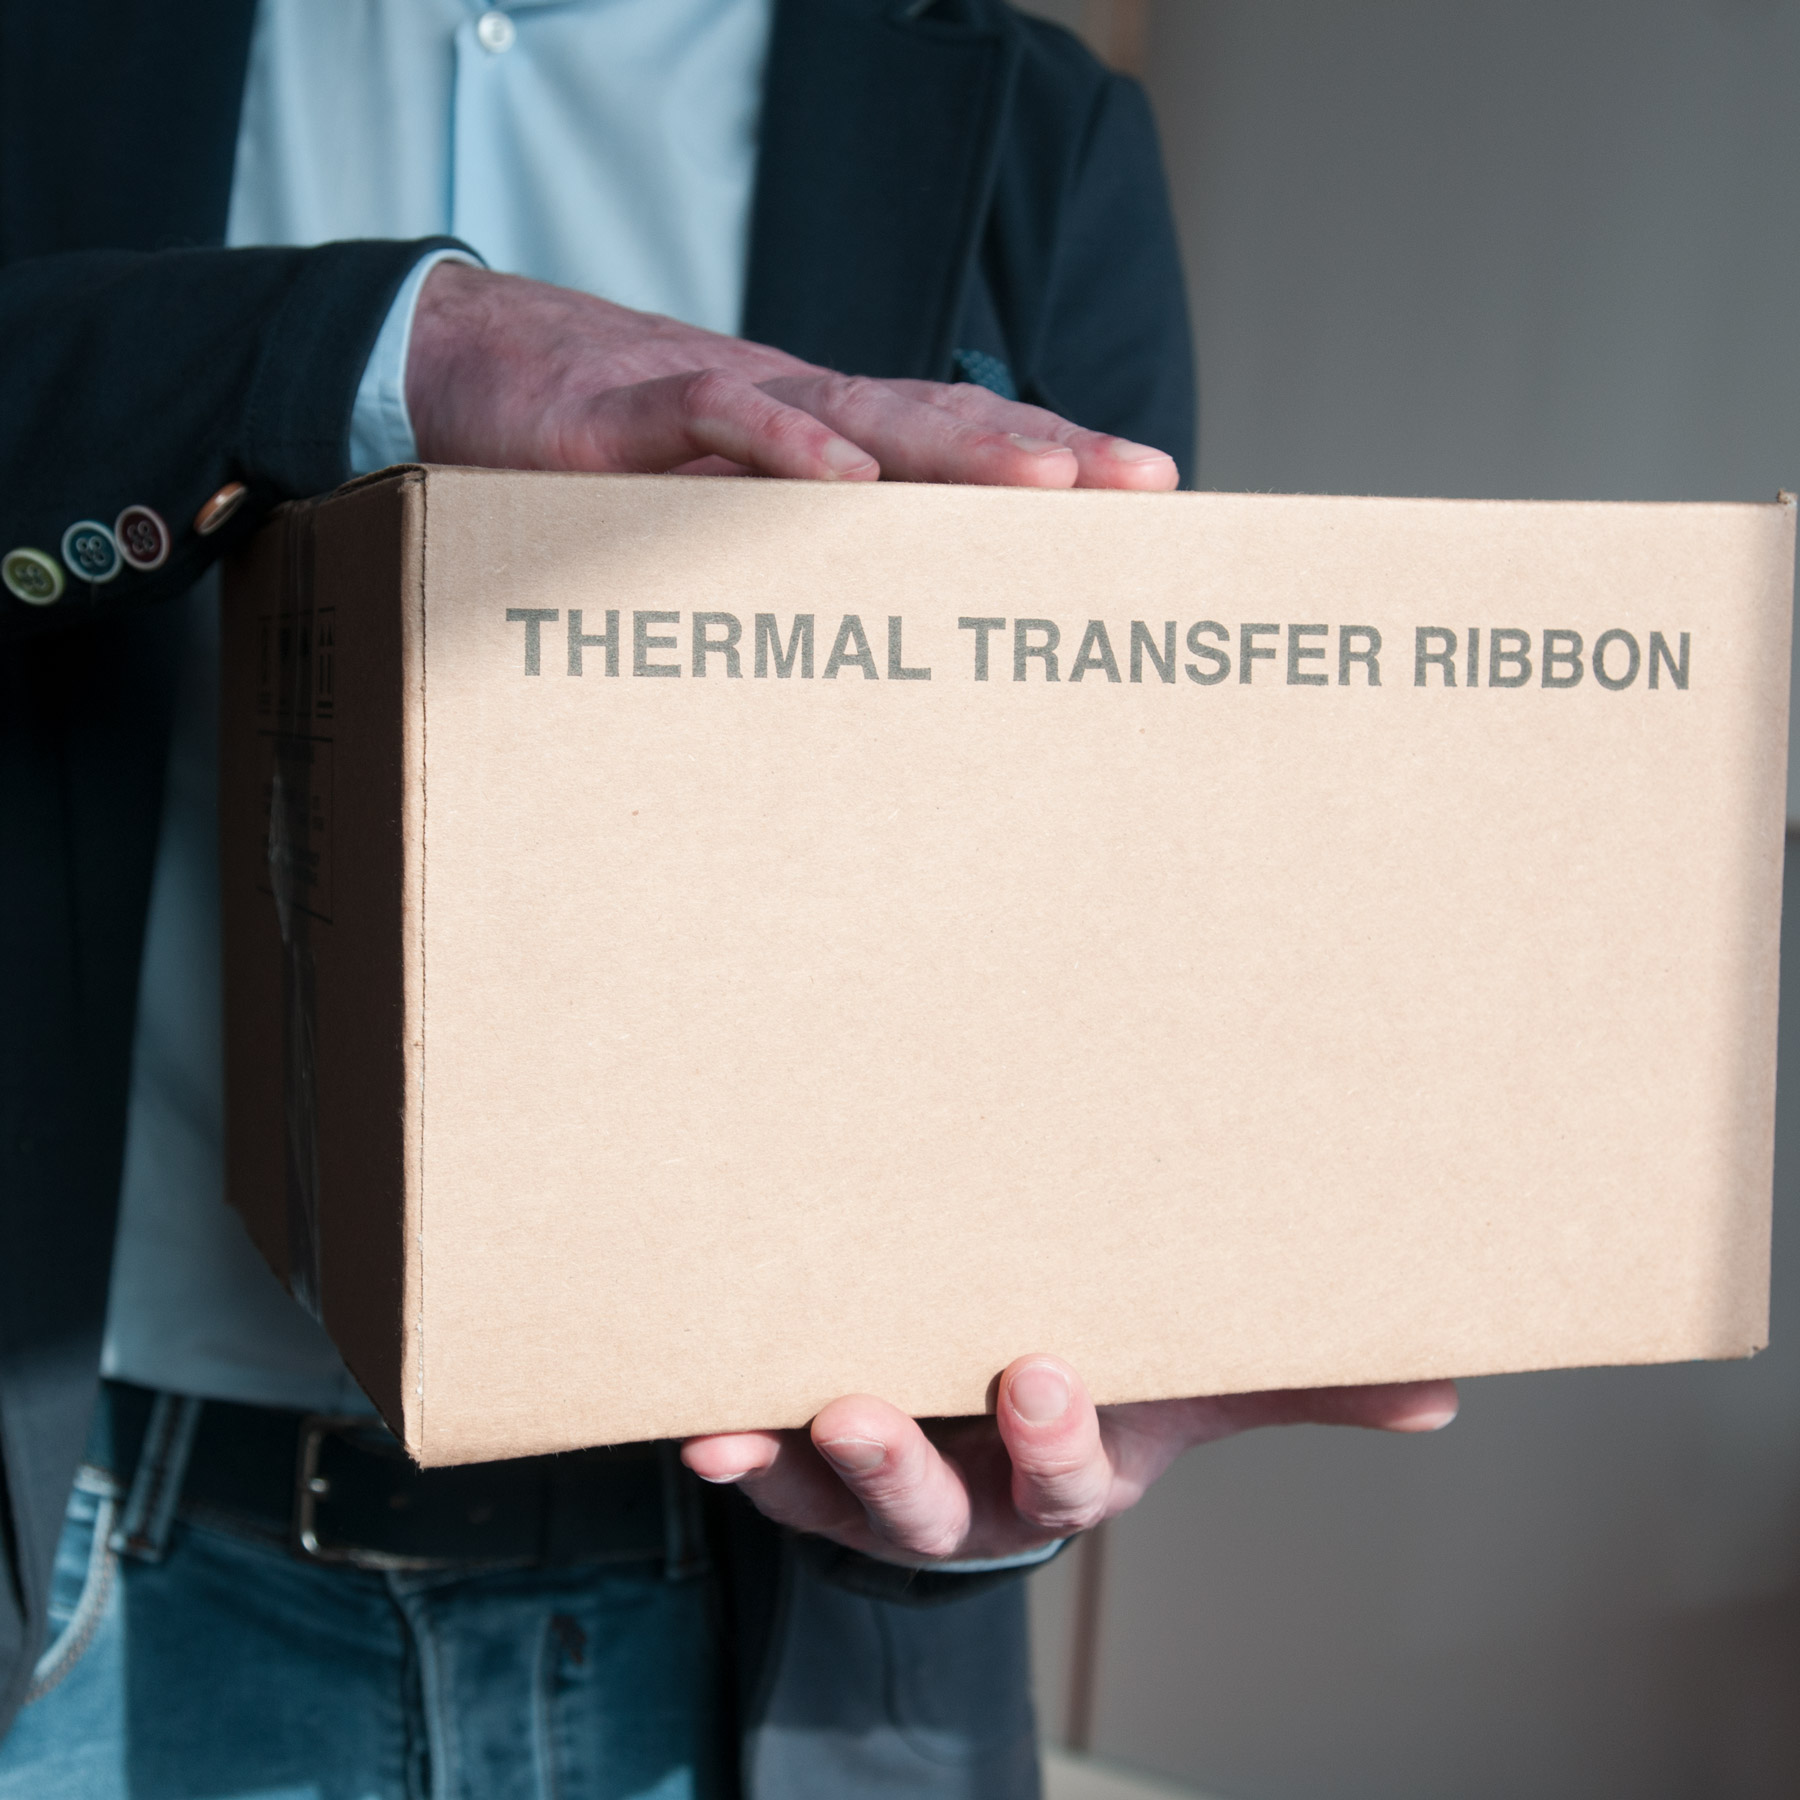 Thermal transfer ribbons: essentials for commerce